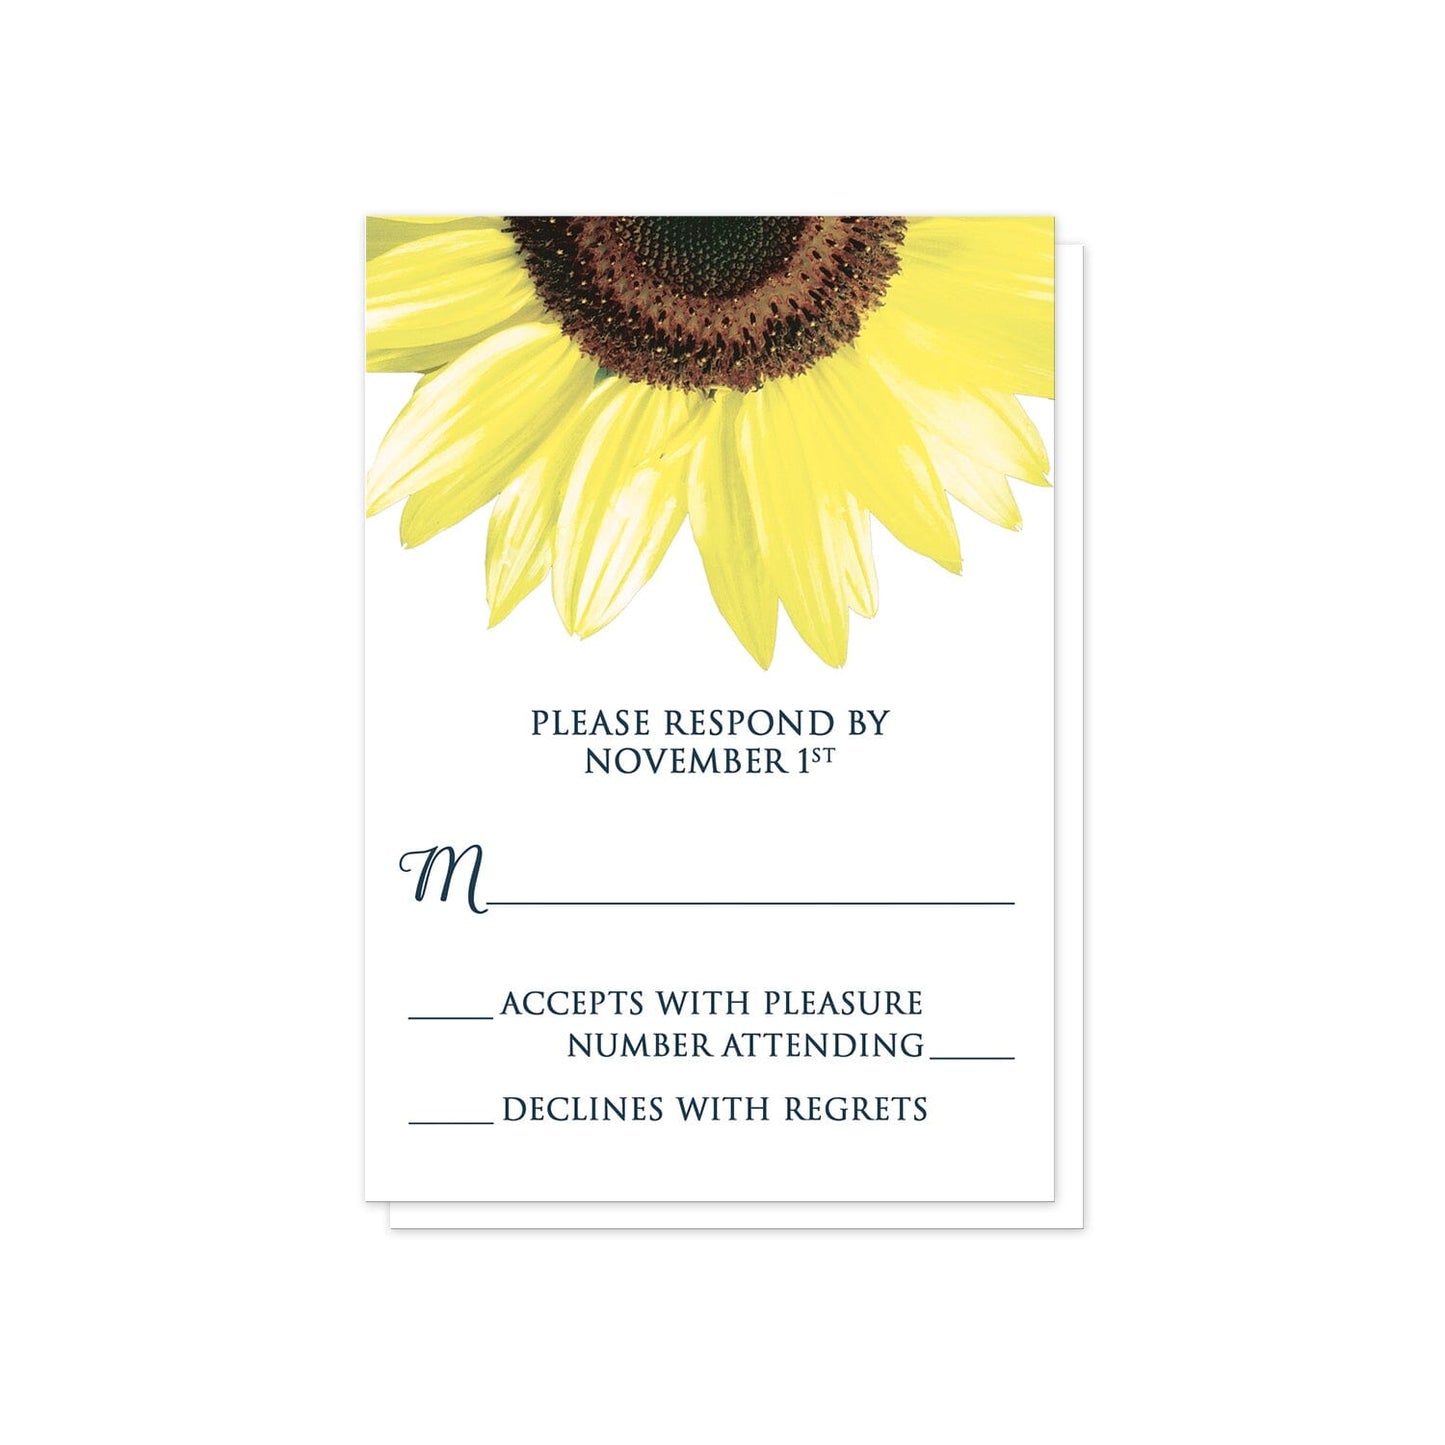 Rustic Sunflower and Denim RSVP Cards at Artistically Invited.